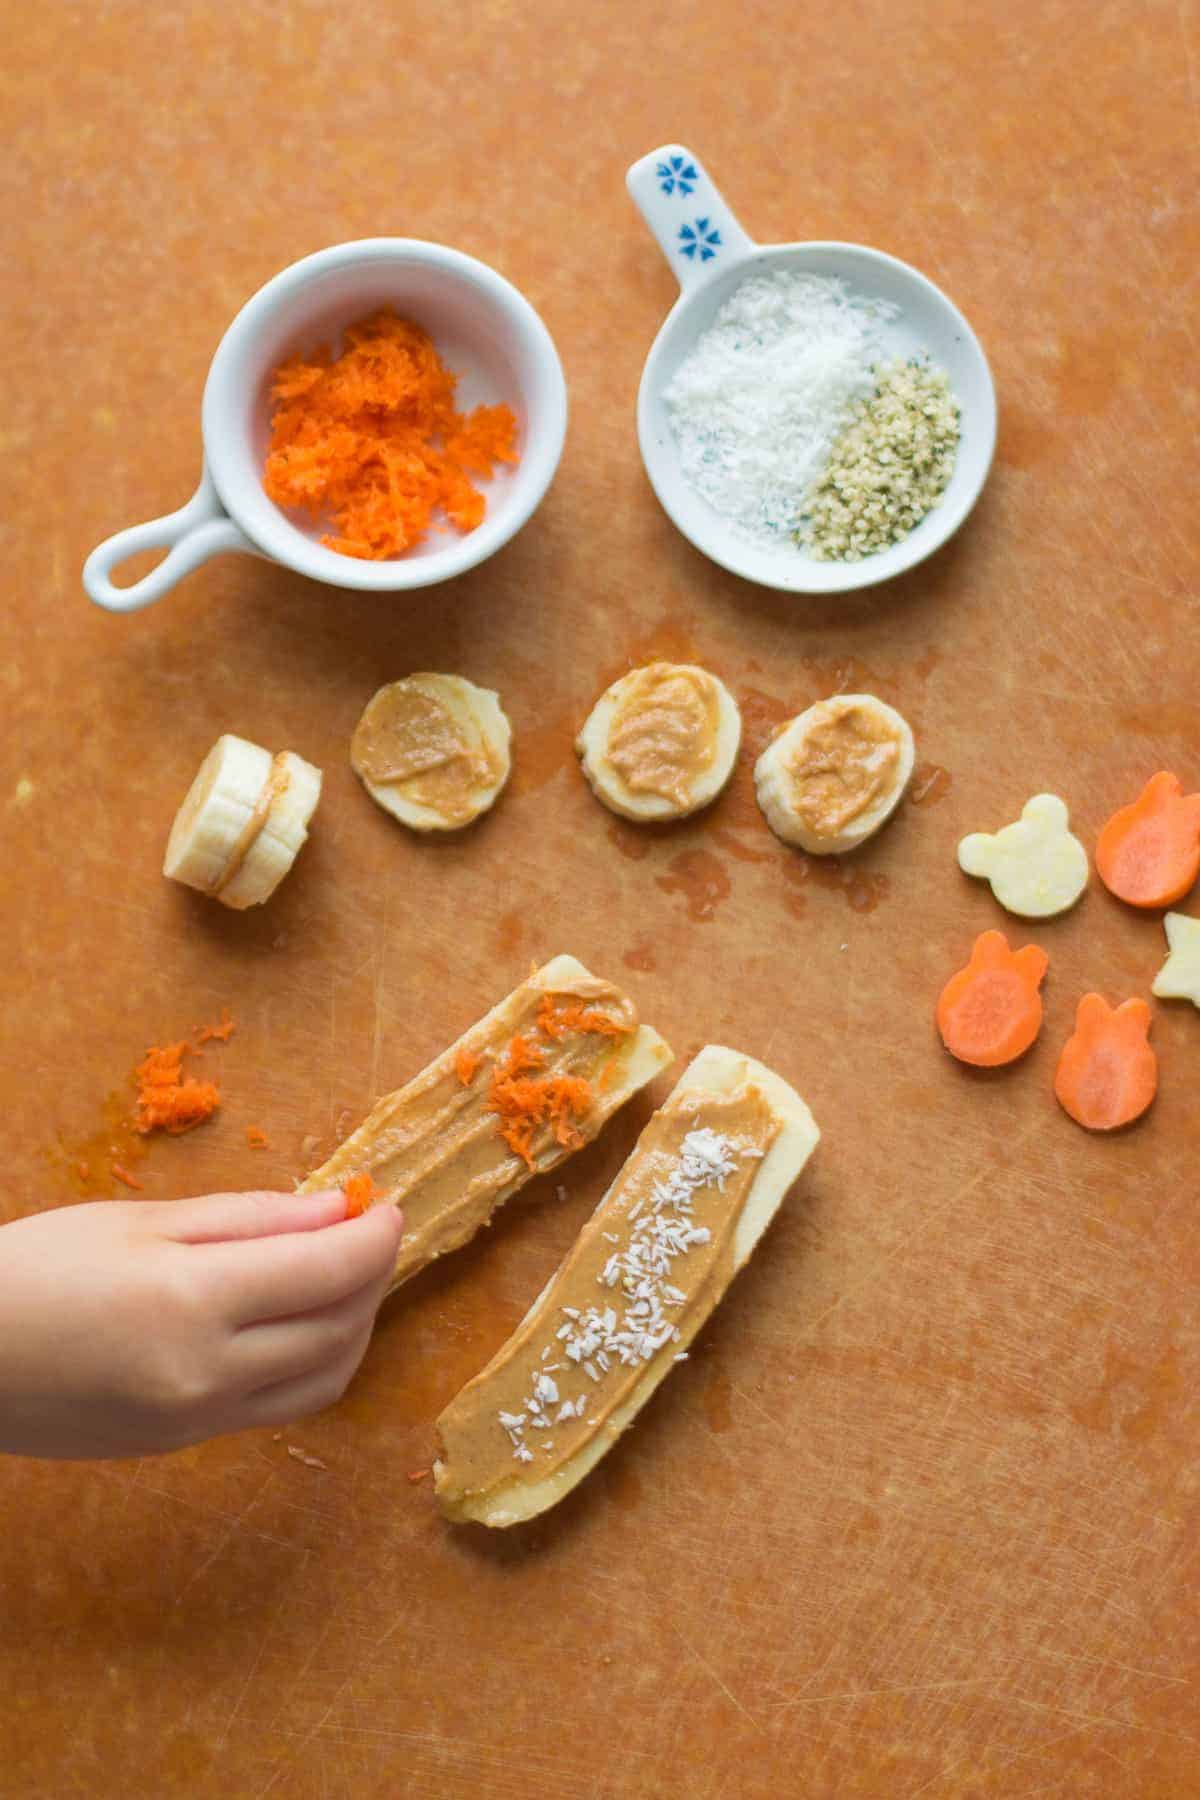 banana logs with peanut butter spread on top along with sliced bananas, grated carrots, coconut, hemp seeds, animal shaped raw zucchini and carrots on a wooden board.